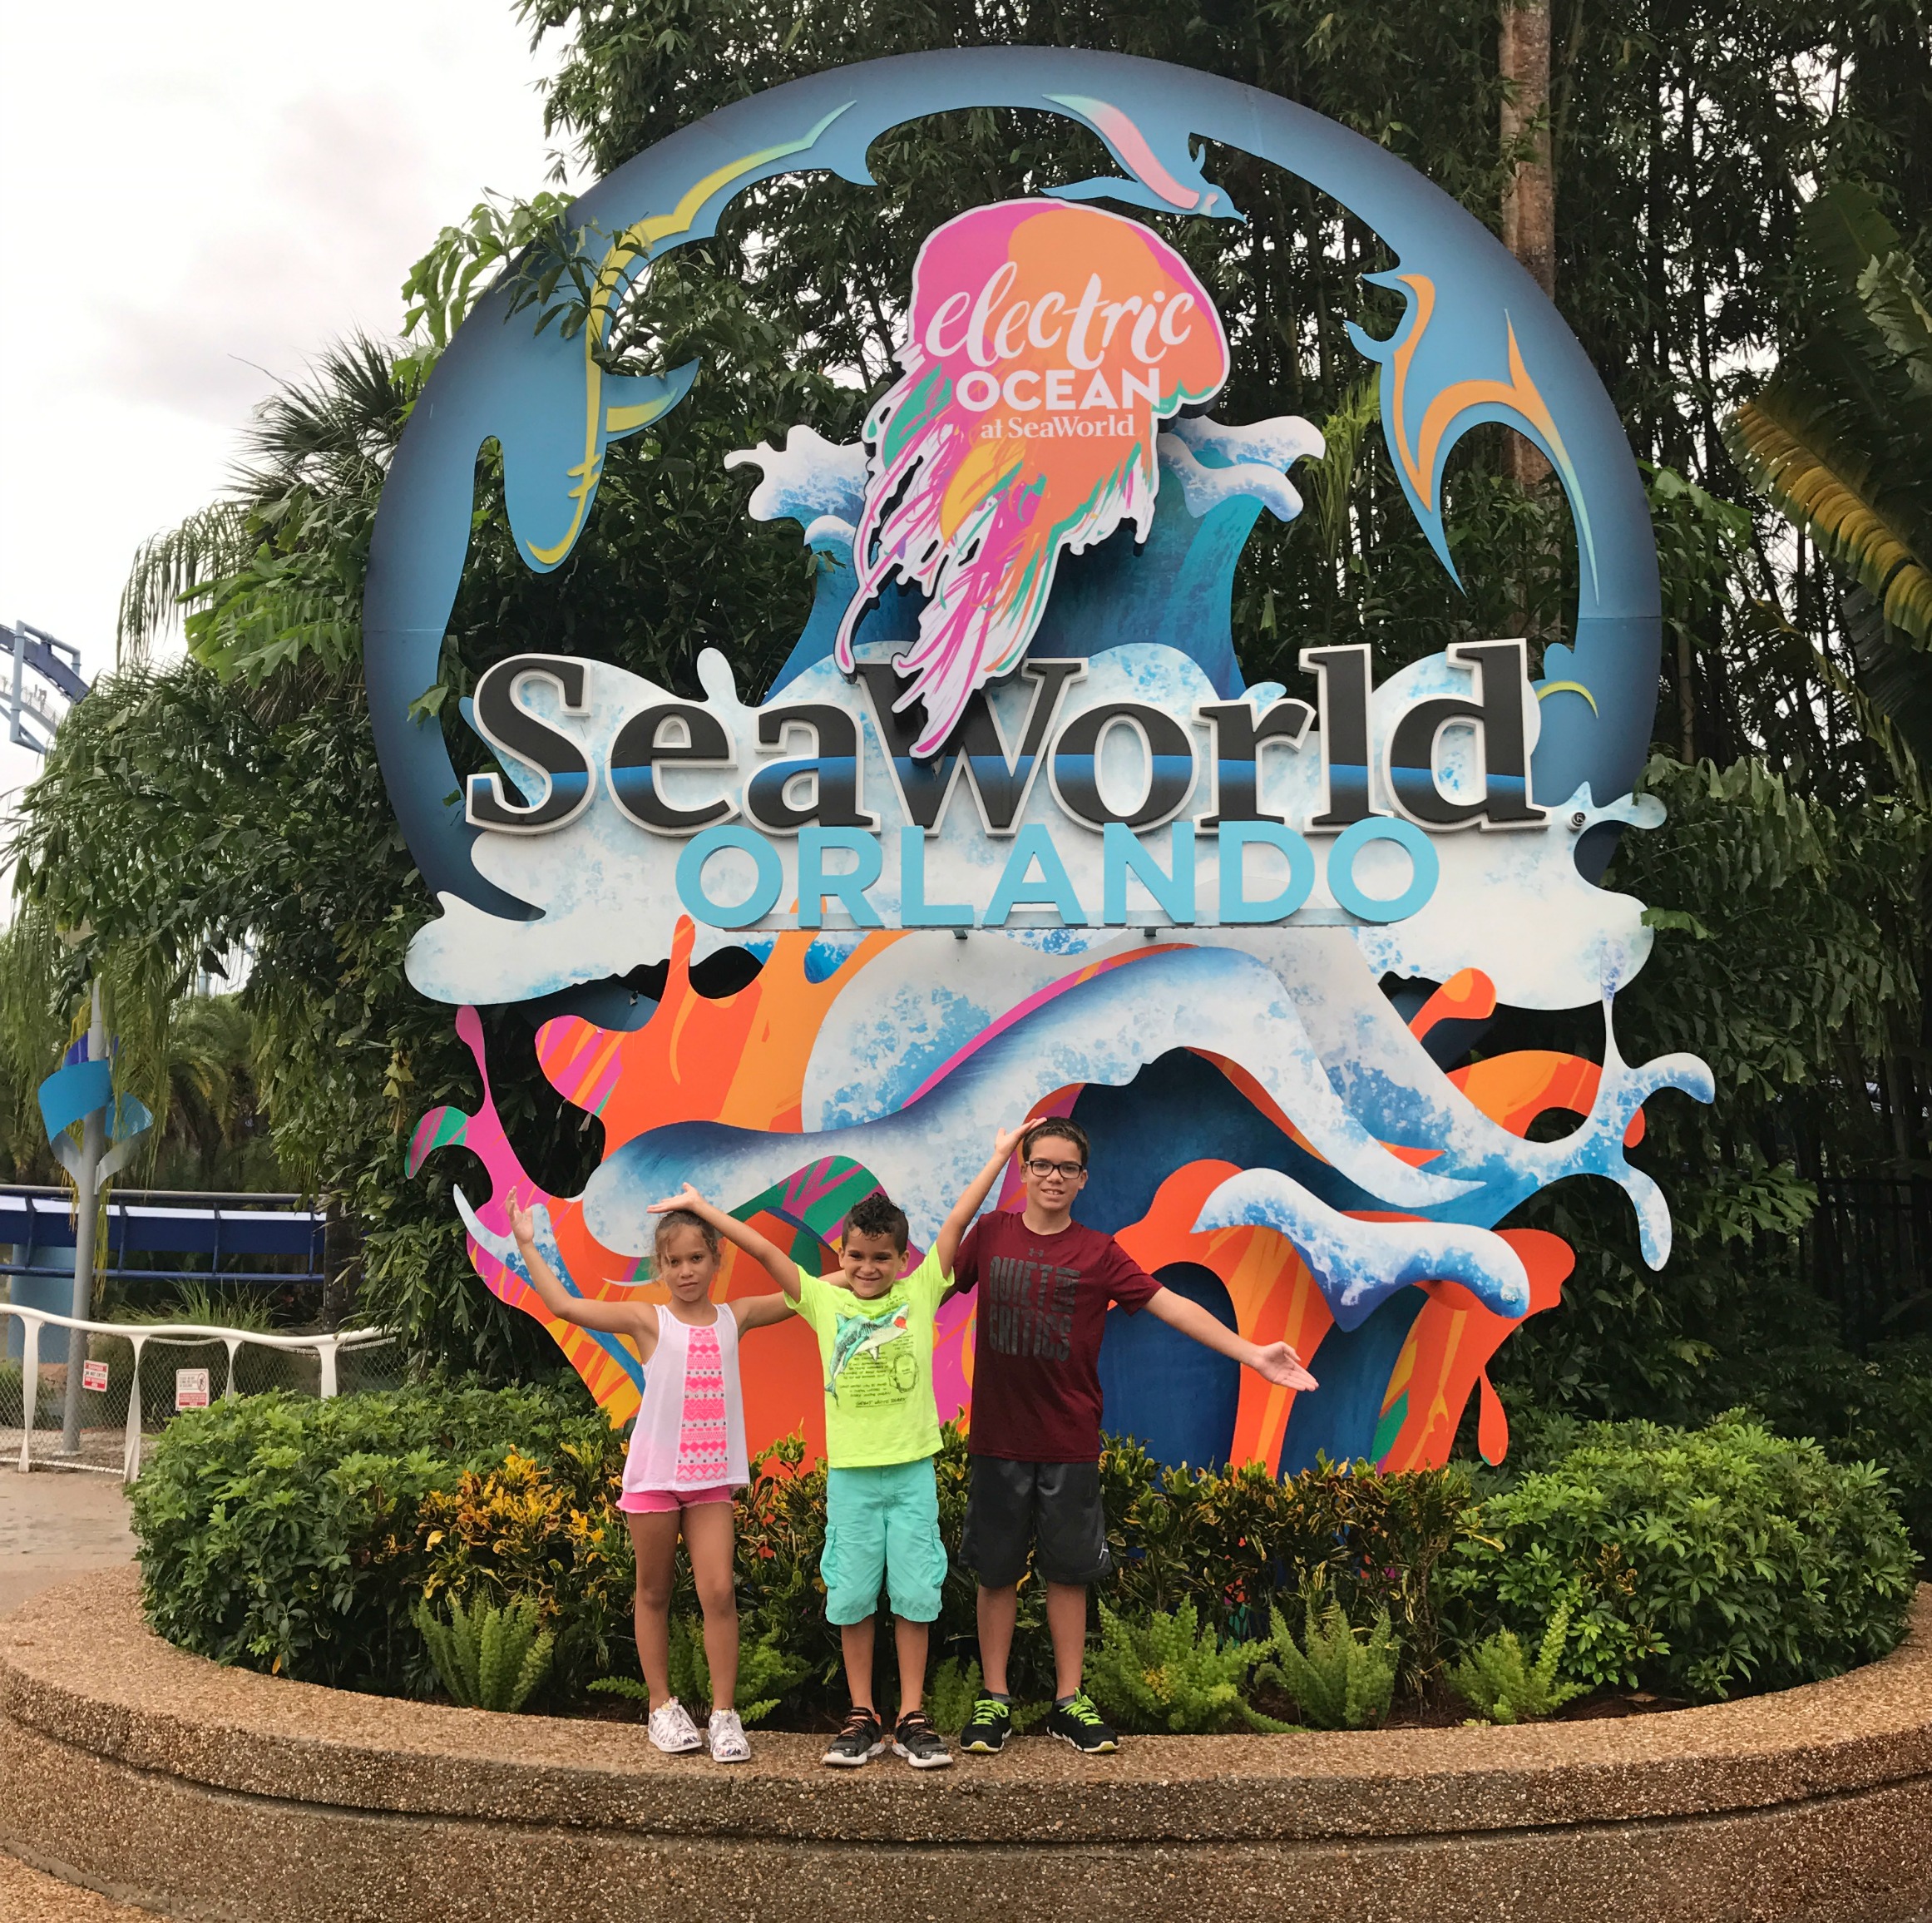 Tips-for-Sea-world-orlando-with-kids